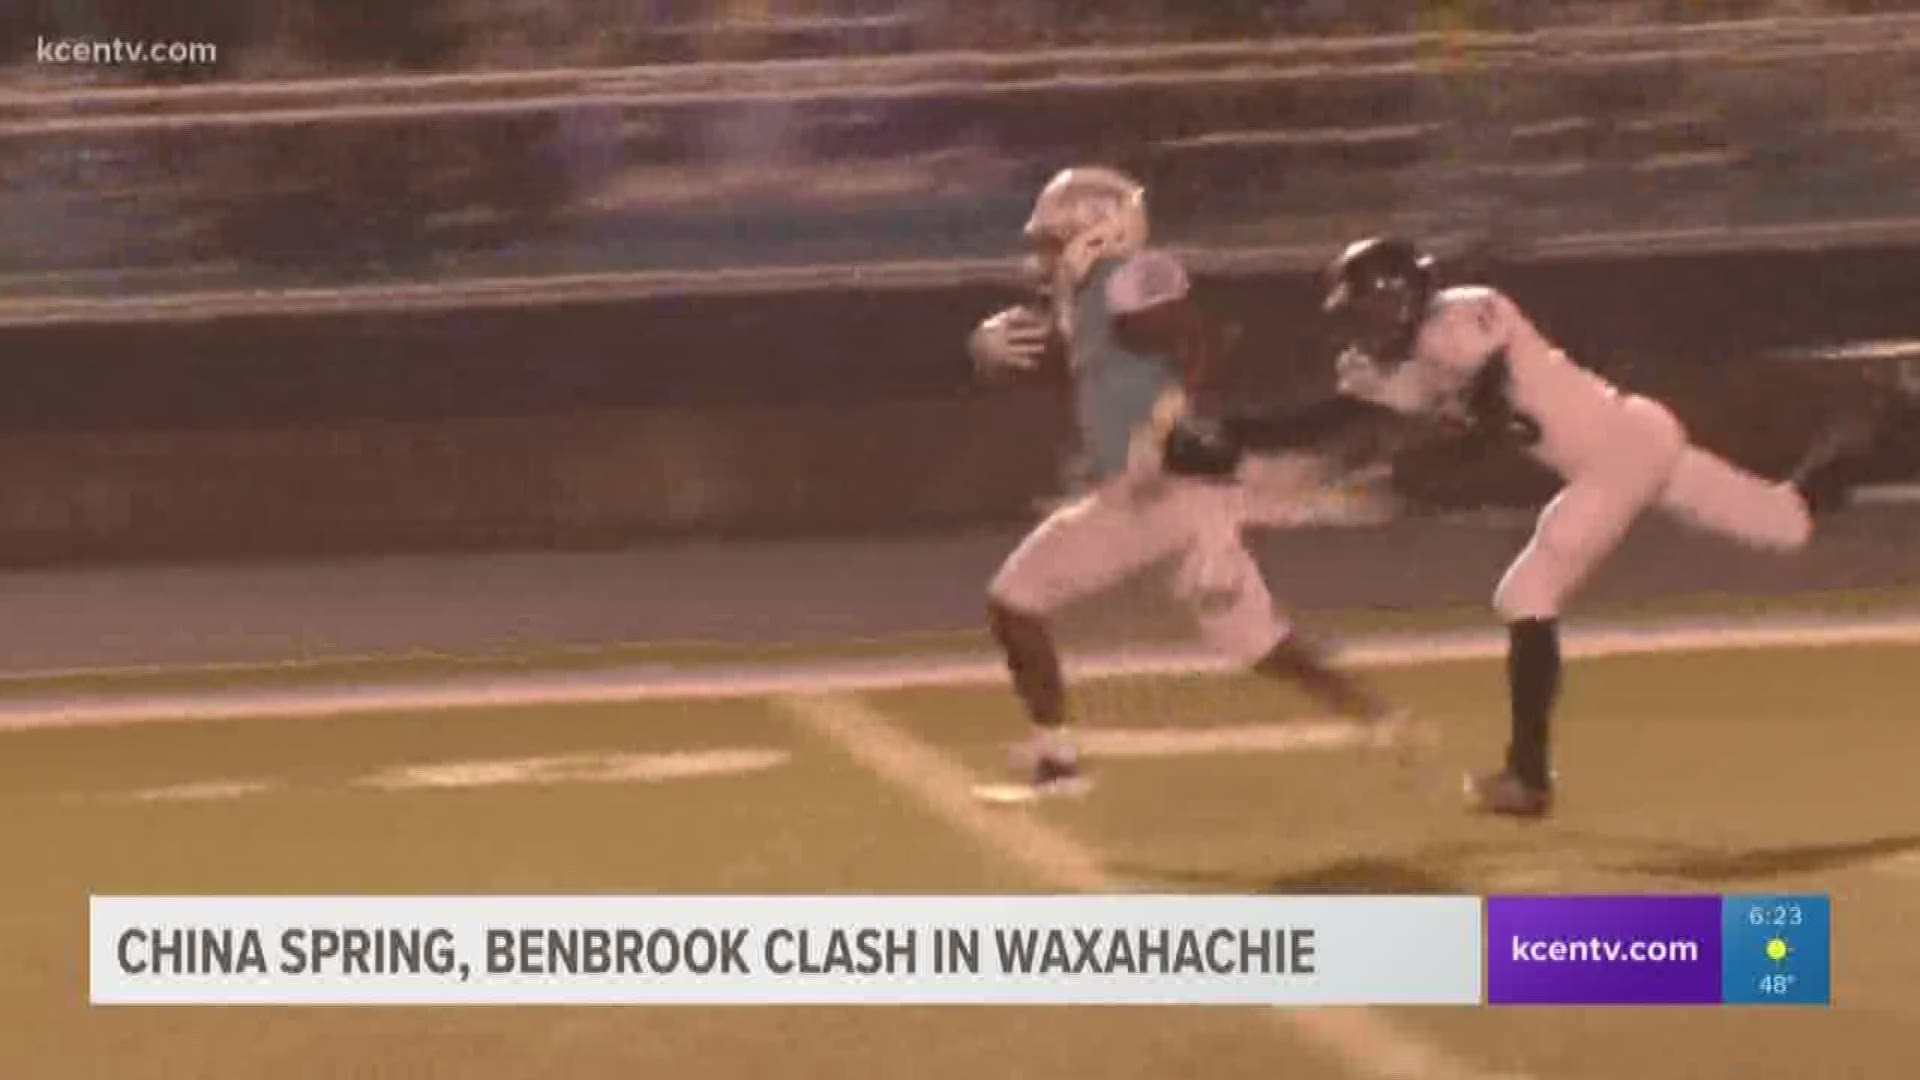 China Spring, Benbrook clash in Waxahachie